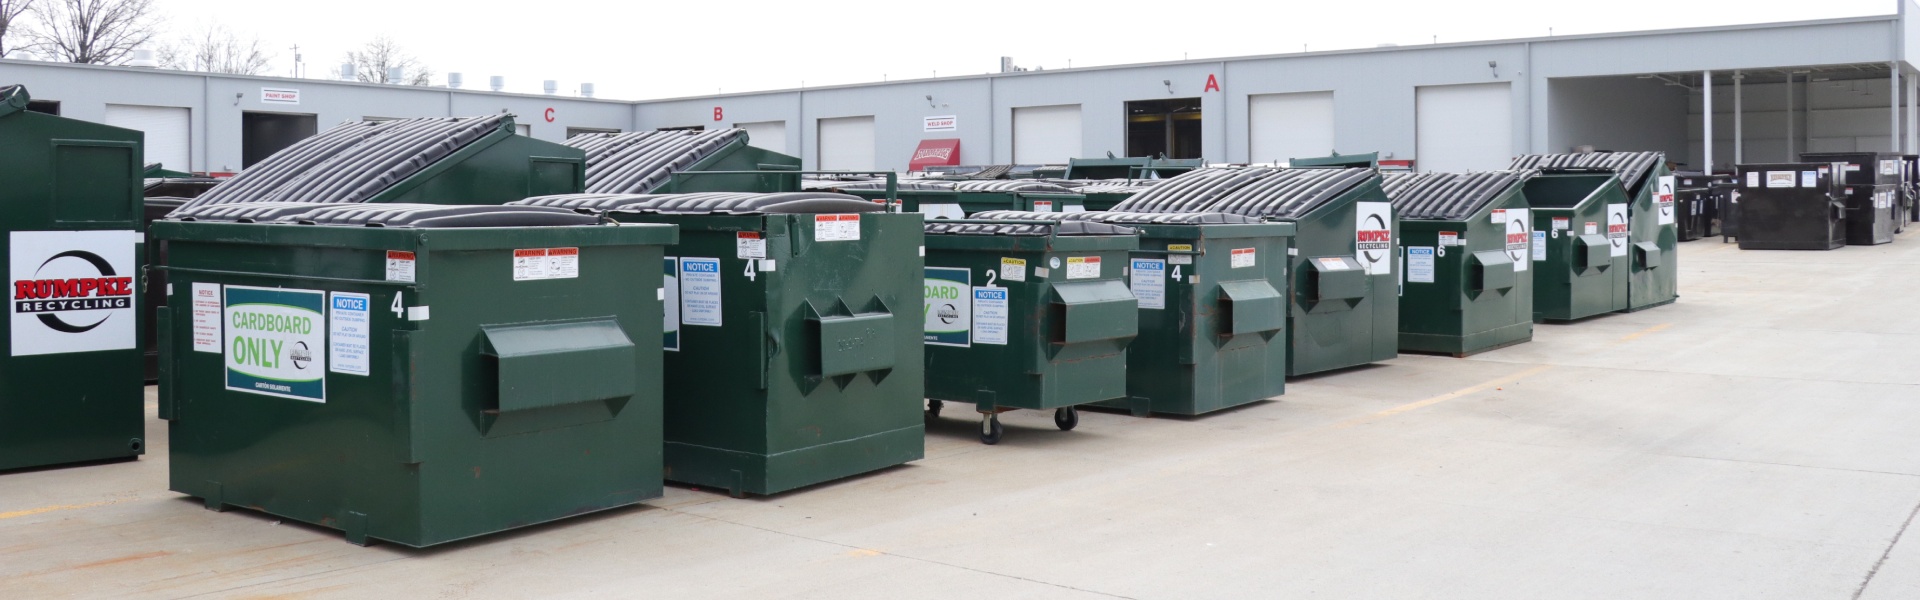 Rumpke Commercial Recycling Dumpster And Container Options